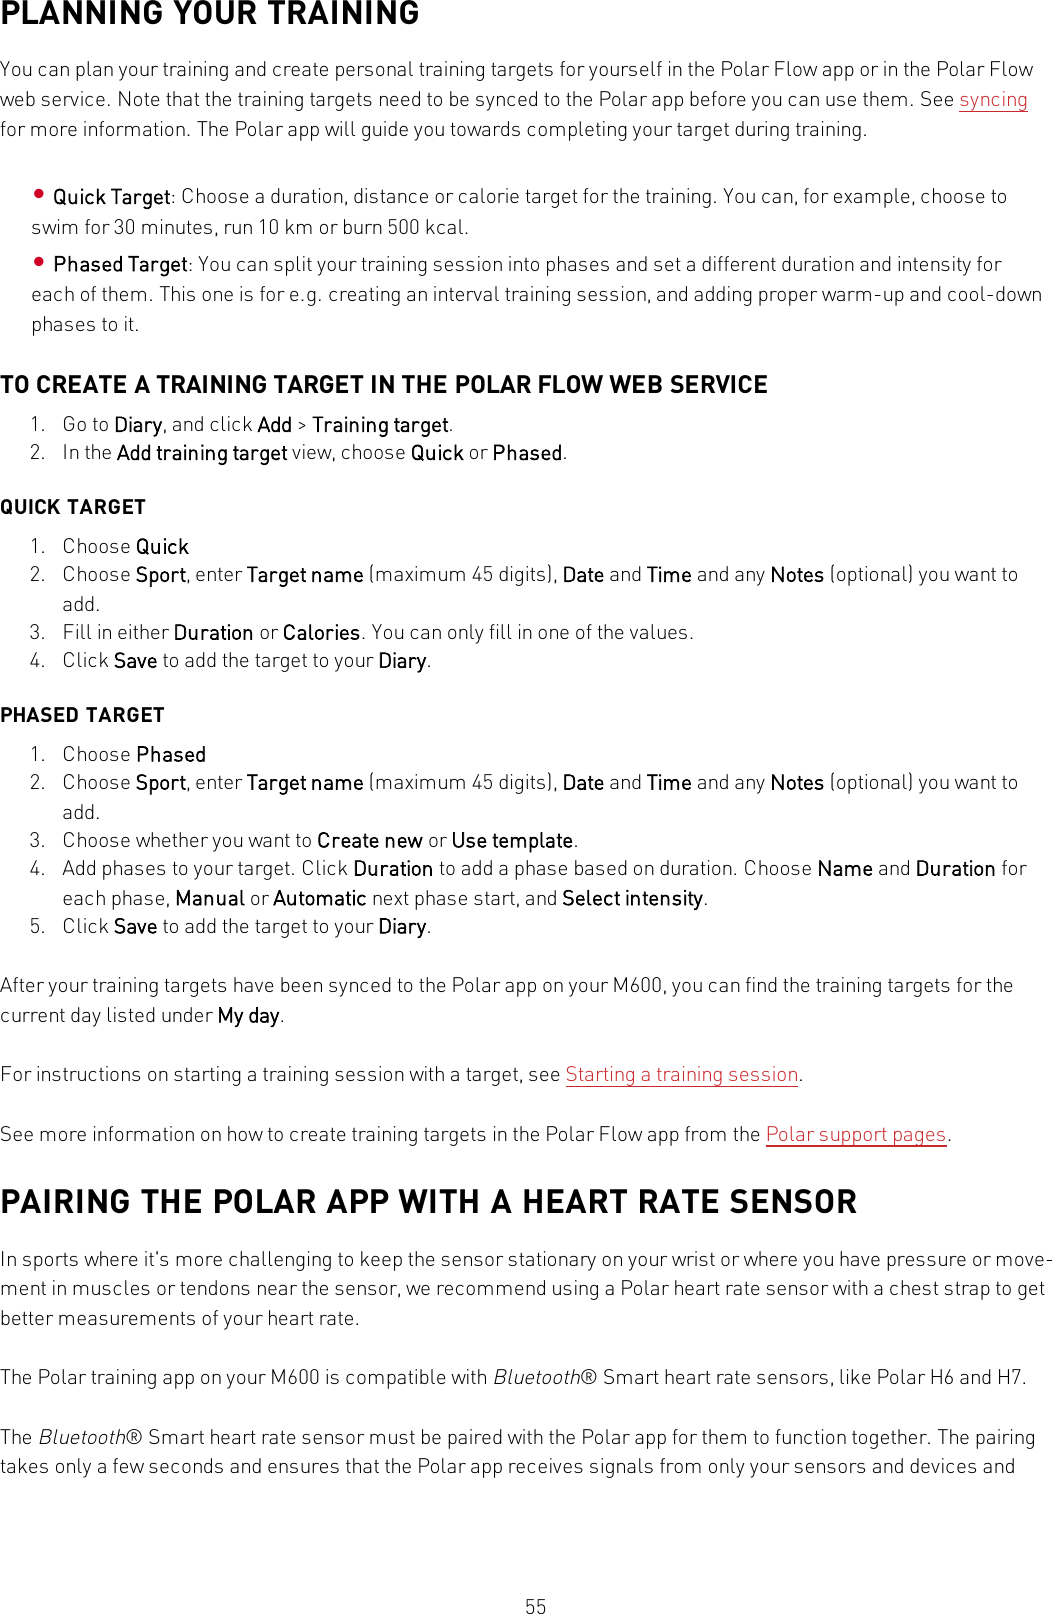 55PLANNING YOUR TRAININGYou can plan your training and create personal training targets for yourself in the Polar Flow app or in the Polar Flowweb service. Note that the training targets need to be synced to the Polar app before you can use them. See syncingfor more information. The Polar app will guide you towards completing your target during training.•Quick Target: Choose a duration, distance or calorie target for the training. You can, for example, choose toswim for 30 minutes, run 10 km or burn 500 kcal.•Phased Target: You can split your training session into phases and set a different duration and intensity foreach of them. This one is for e.g. creating an interval training session, and adding proper warm-up and cool-downphases to it.TO CREATE A TRAINING TARGET IN THE POLAR FLOW WEB SERVICE1. Go to Diary, and click Add &gt;Training target.2. In the Add training target view, choose Quick or Phased.QUICK TARGET1. Choose Quick2. Choose Sport, enter Target name (maximum 45 digits), Date and Time and any Notes (optional) you want toadd.3. Fill in either Duration or Calories. You can only fill in one of the values.4. Click Save to add the target to your Diary.PHASED TARGET1. Choose Phased2. Choose Sport, enter Target name (maximum 45 digits), Date and Time and any Notes (optional) you want toadd.3. Choose whether you want to Create new or Use template.4. Add phases to your target. Click Duration to add a phase based on duration. Choose Name and Duration foreach phase, Manual or Automatic next phase start, and Select intensity.5. Click Save to add the target to your Diary.After your training targets have been synced to the Polar app on your M600, you can find the training targets for thecurrent day listed under My day.For instructions on starting a training session with a target, see Starting a training session.See more information on how to create training targets in the Polar Flow app from the Polar support pages.PAIRING THE POLAR APP WITH A HEART RATE SENSORIn sports where it&apos;s more challenging to keep the sensor stationary on your wrist or where you have pressure or move-ment in muscles or tendons near the sensor, we recommend using a Polar heart rate sensor with a chest strap to getbetter measurements of your heart rate.The Polar training app on your M600 is compatible withBluetooth® Smart heart rate sensors, like Polar H6 and H7.TheBluetooth® Smart heart rate sensor must be paired with the Polar app for them to function together. The pairingtakes only a few seconds and ensures that the Polar app receives signals from only your sensors and devices and